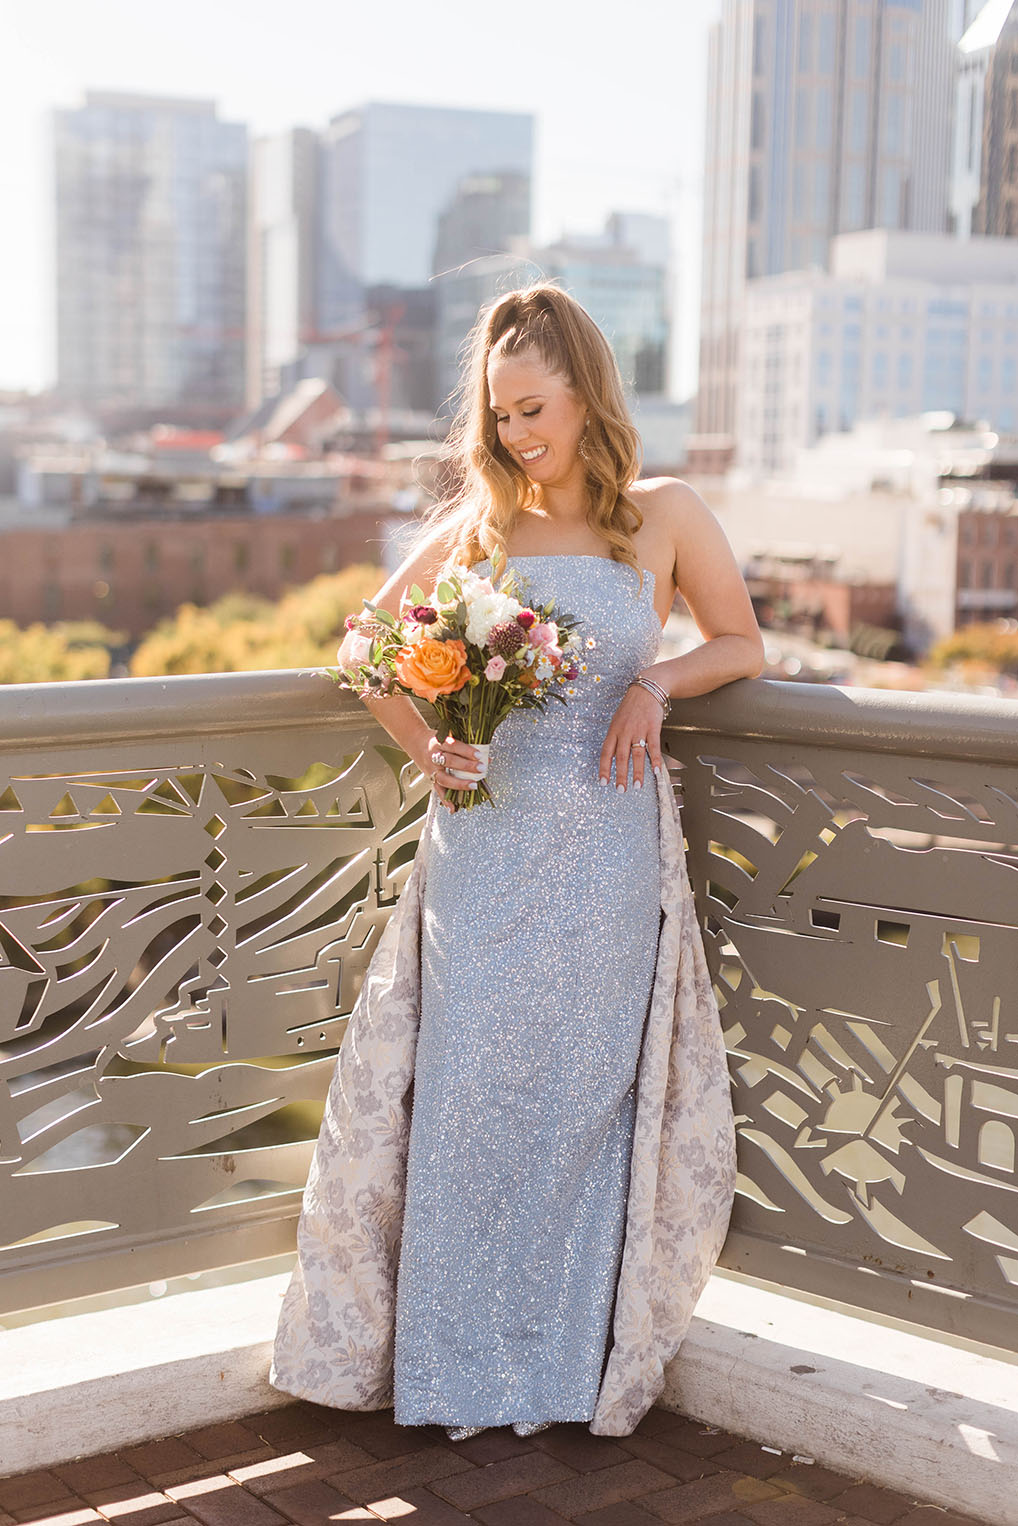 Emmy in her Blue Wedding Dress with Colorful Bouquet on Pedestrian Bridge